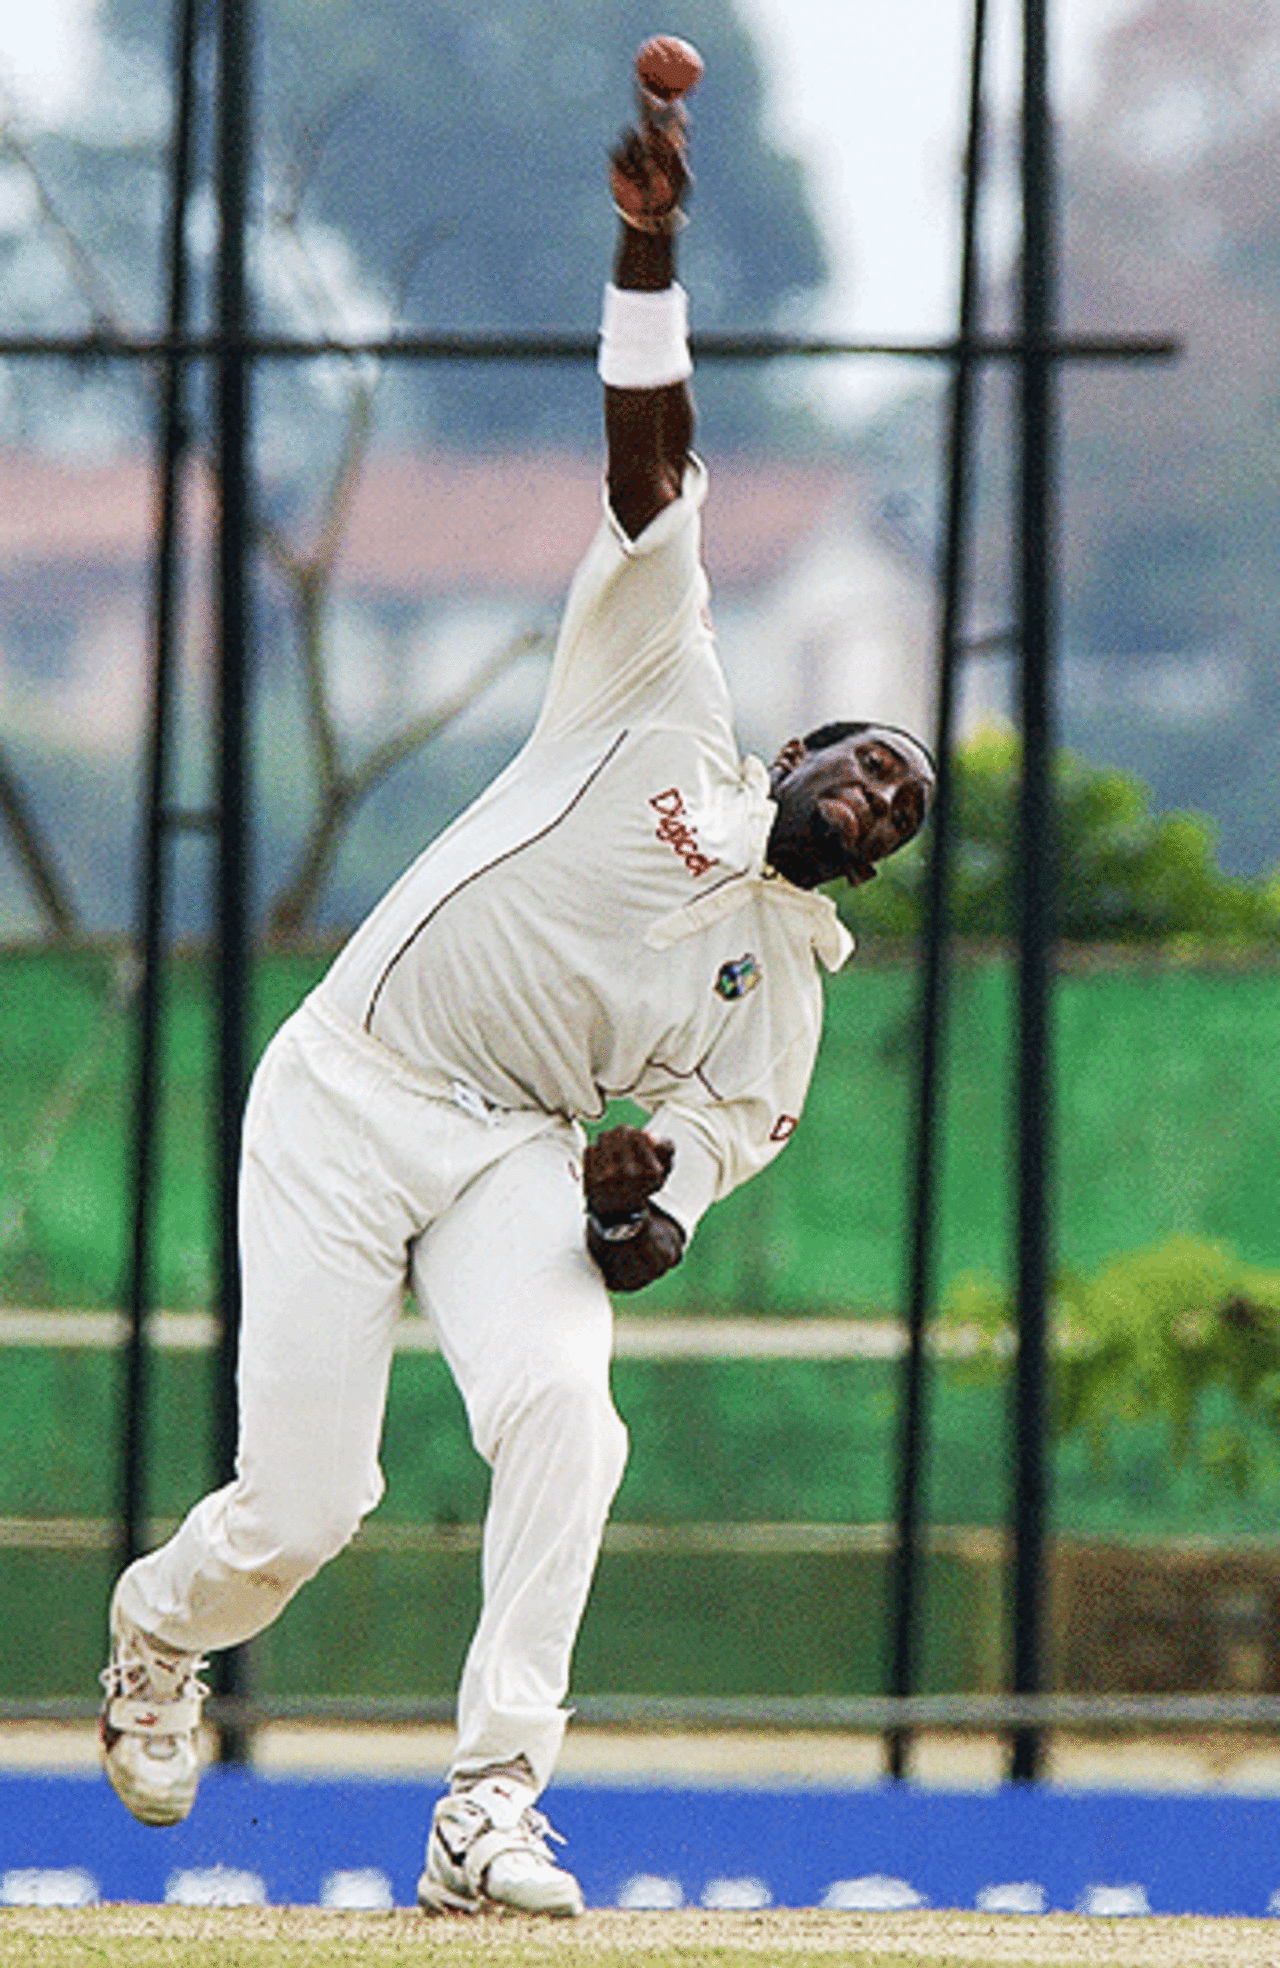 West Indies bowler, Jermaine Lawson delivers the ball during the first day of the second and final test match between Sri Lanka and West Indies at the Asgiriya grounds in Kandy, 22 July 2005